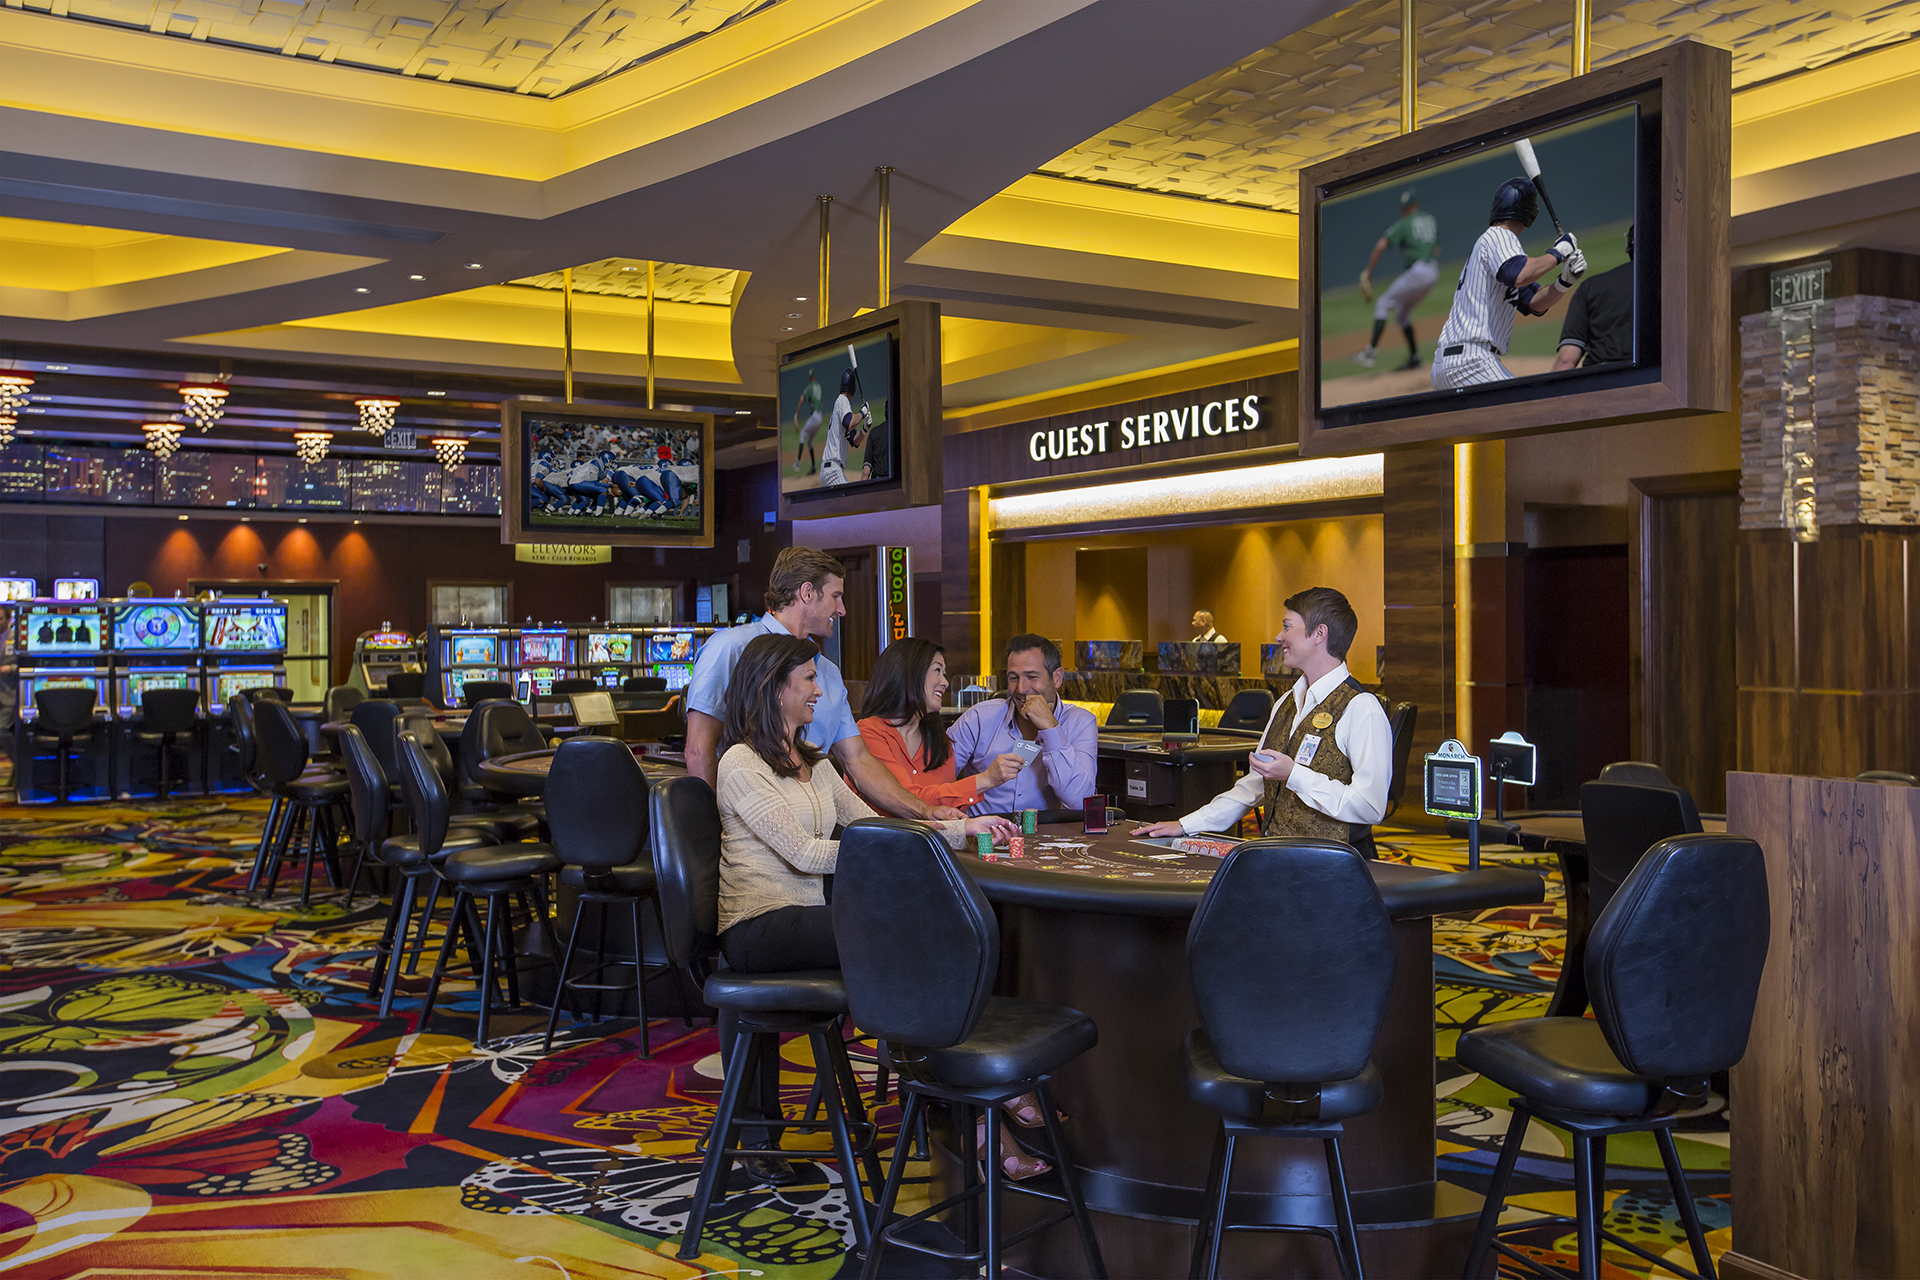 If you are interested in a career as a table games dealer, we are also offering free Dealer School. If you successfully complete the course, you are guaranteed a job with Monarch Casino Resort Spa. Text “MONARCH” to 97211 or go to jobs.monarchblackhawk.com for more information.
